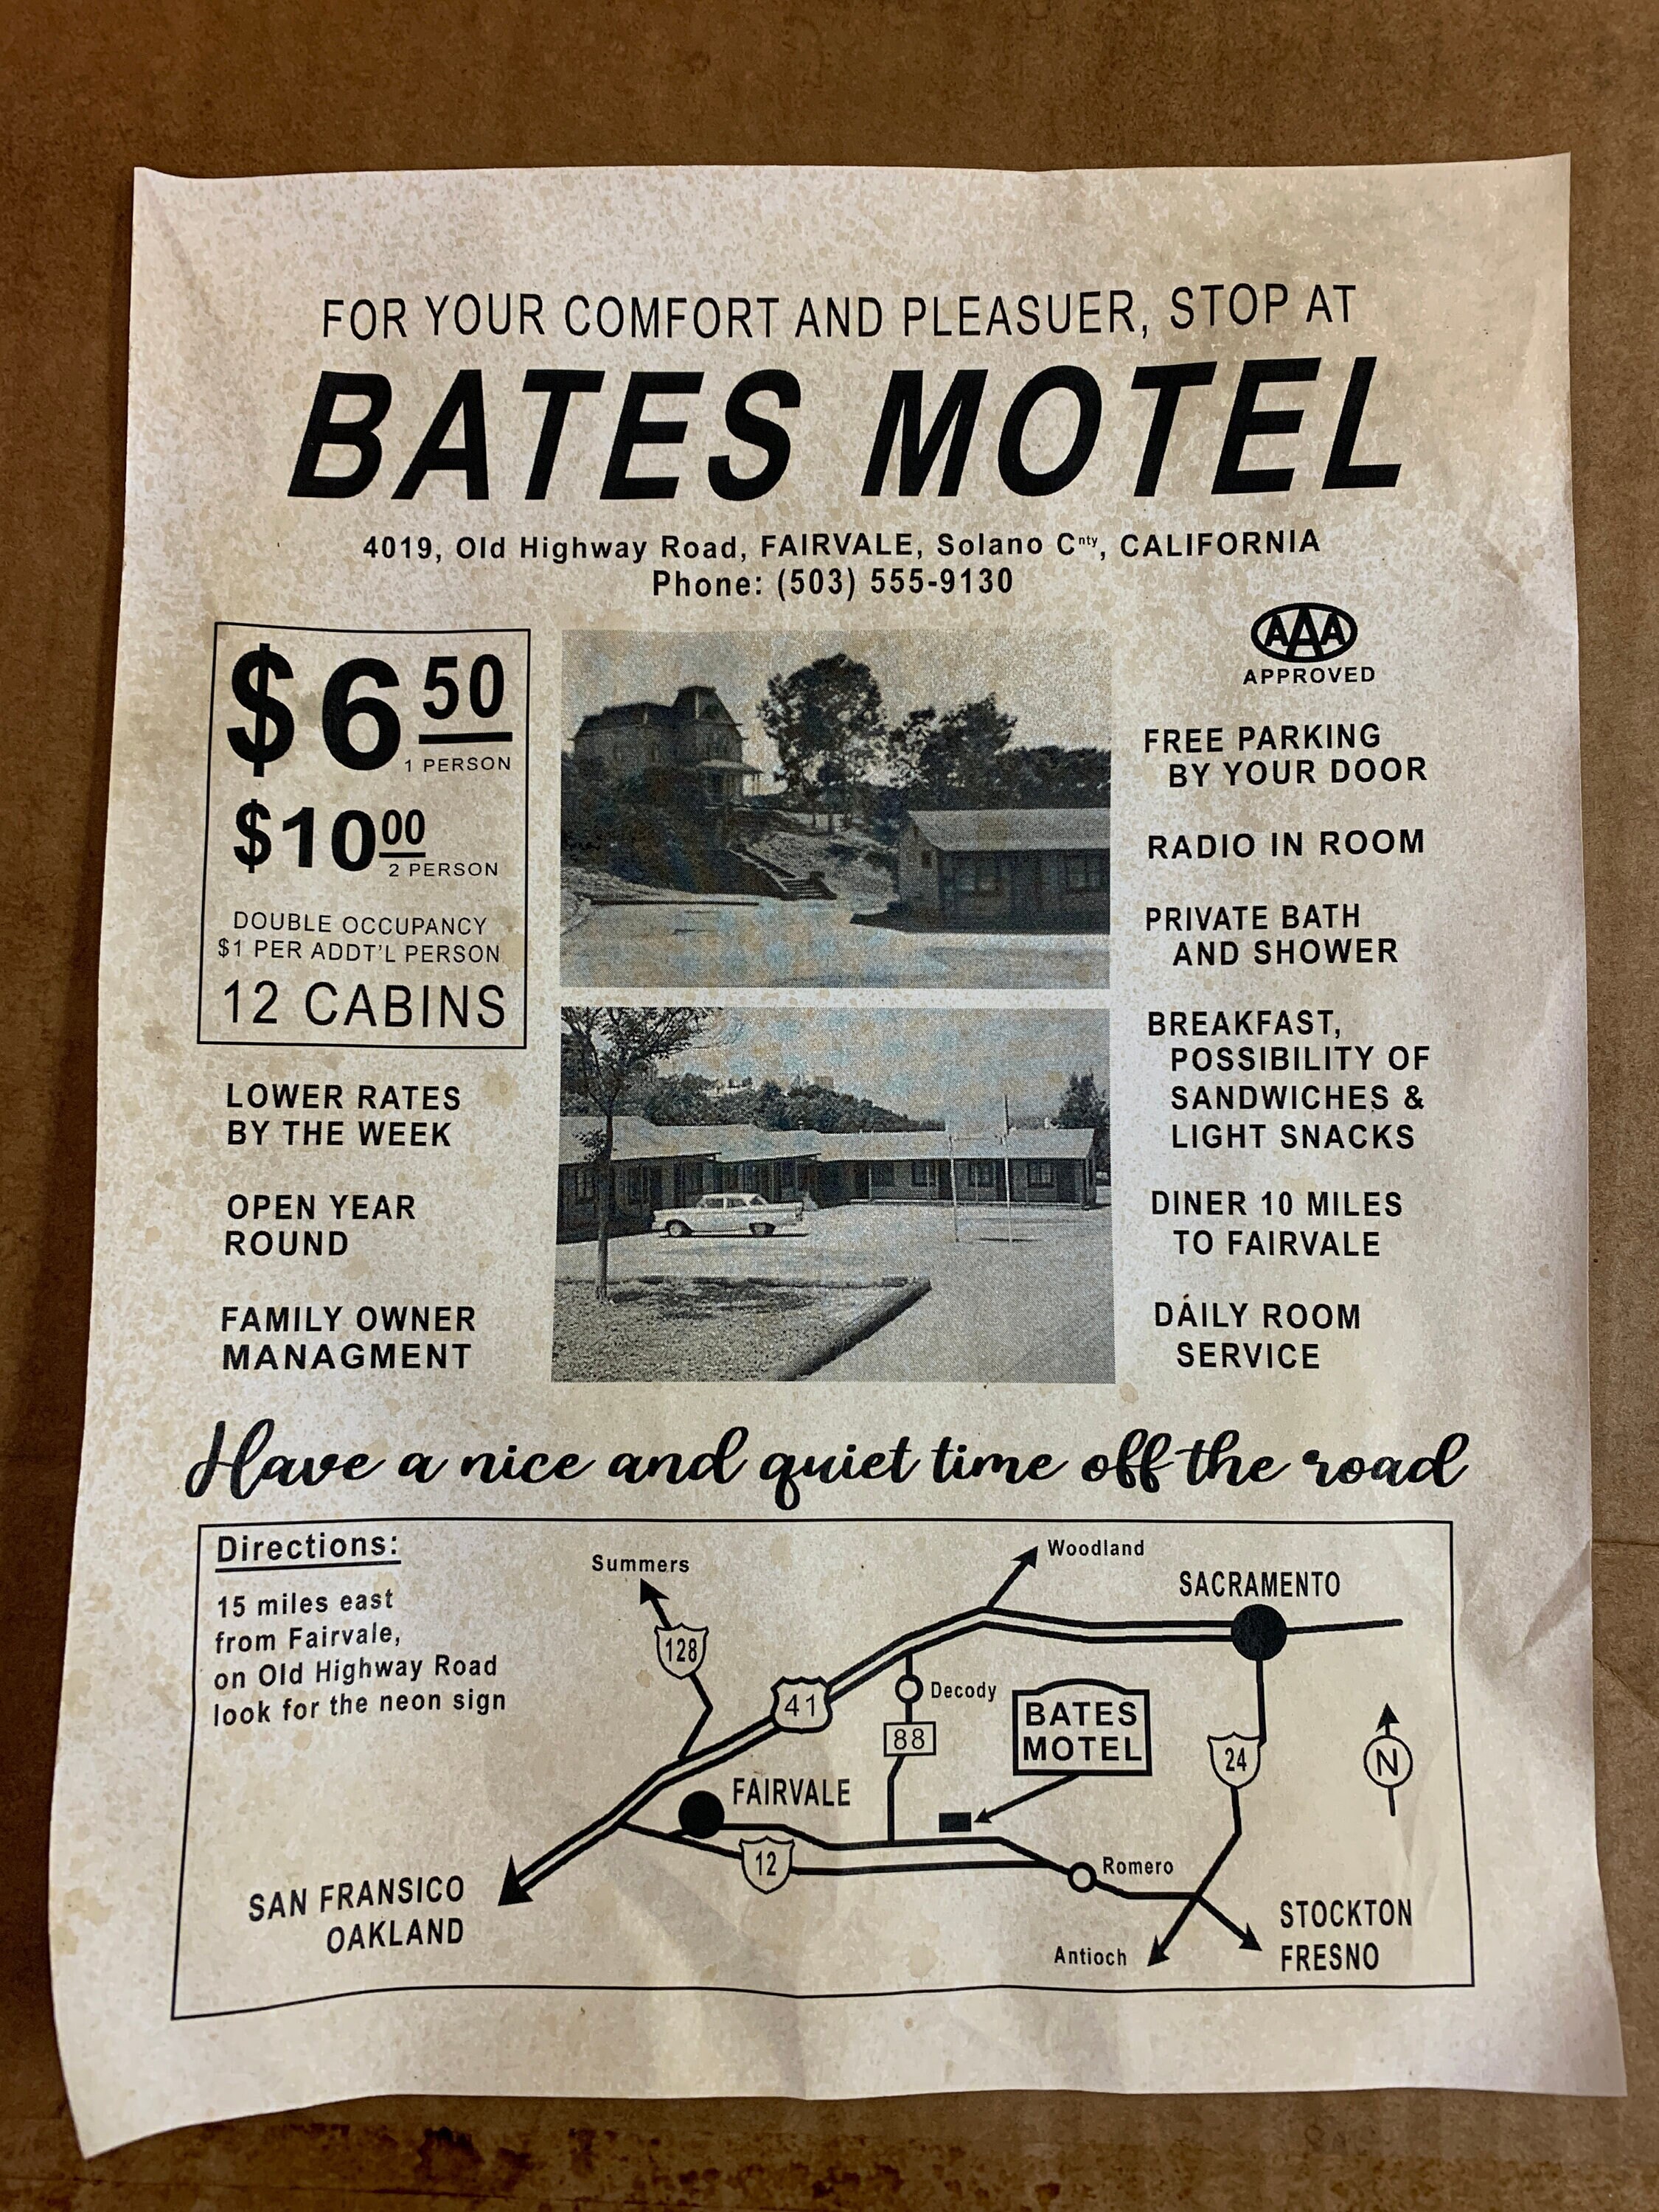 Bates Motel Flyer A Great Place to Stay and Bring Your Mom - Etsy